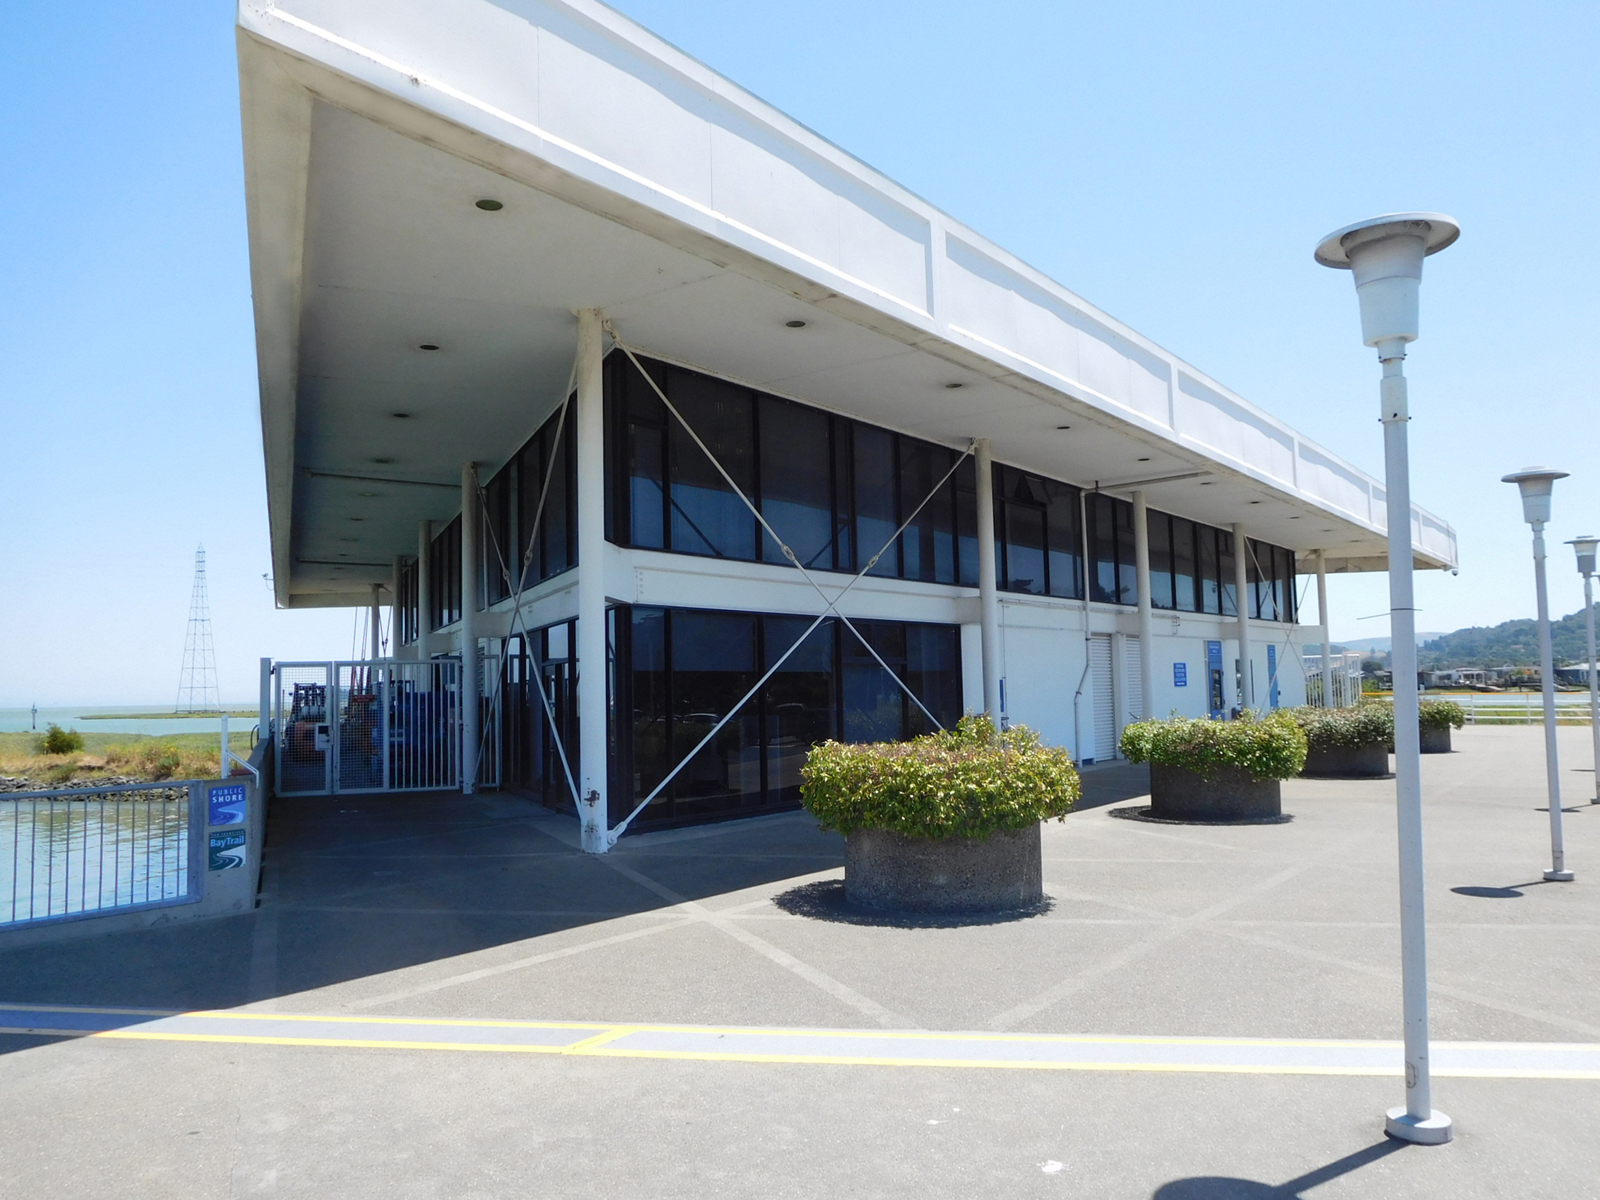 Larkspur Ferry Terminal, Administrative Office Remodel